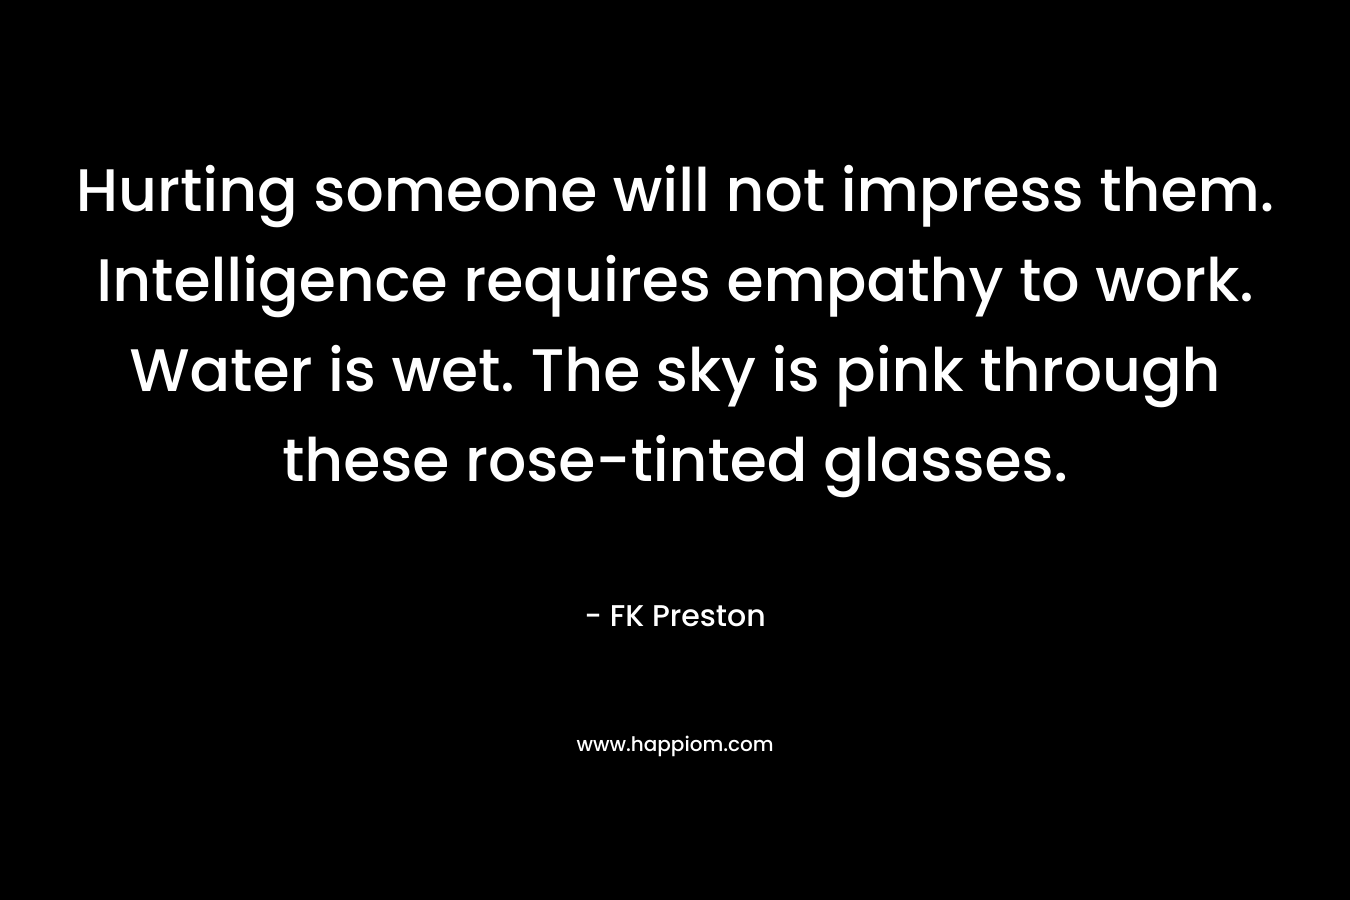 Hurting someone will not impress them. Intelligence requires empathy to work. Water is wet. The sky is pink through these rose-tinted glasses. – FK Preston